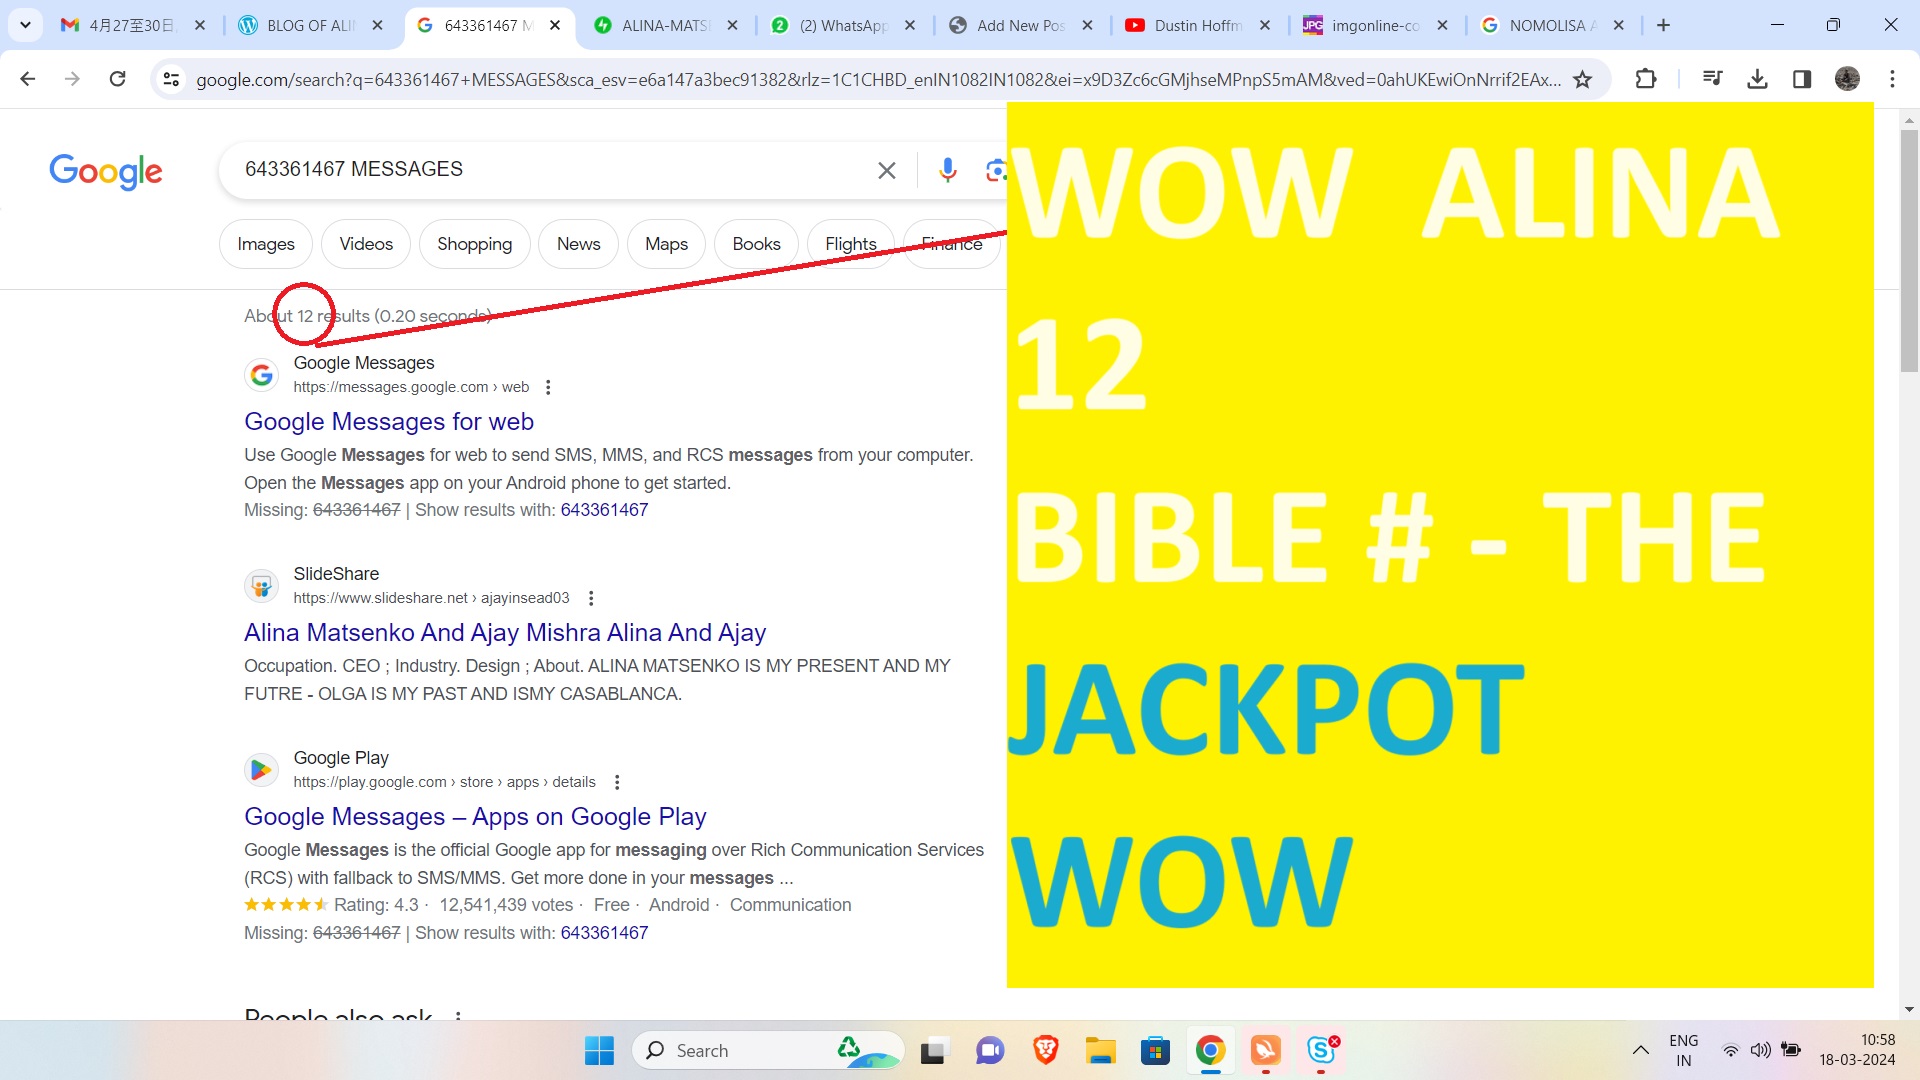 NOMOLISA MESSAGES WOW ALINA MATSENKO AJAY MISHRA THE BIBLE NUMBER 12 THE JACK POT 6 + 6 =12 WOW WHAT A DAY